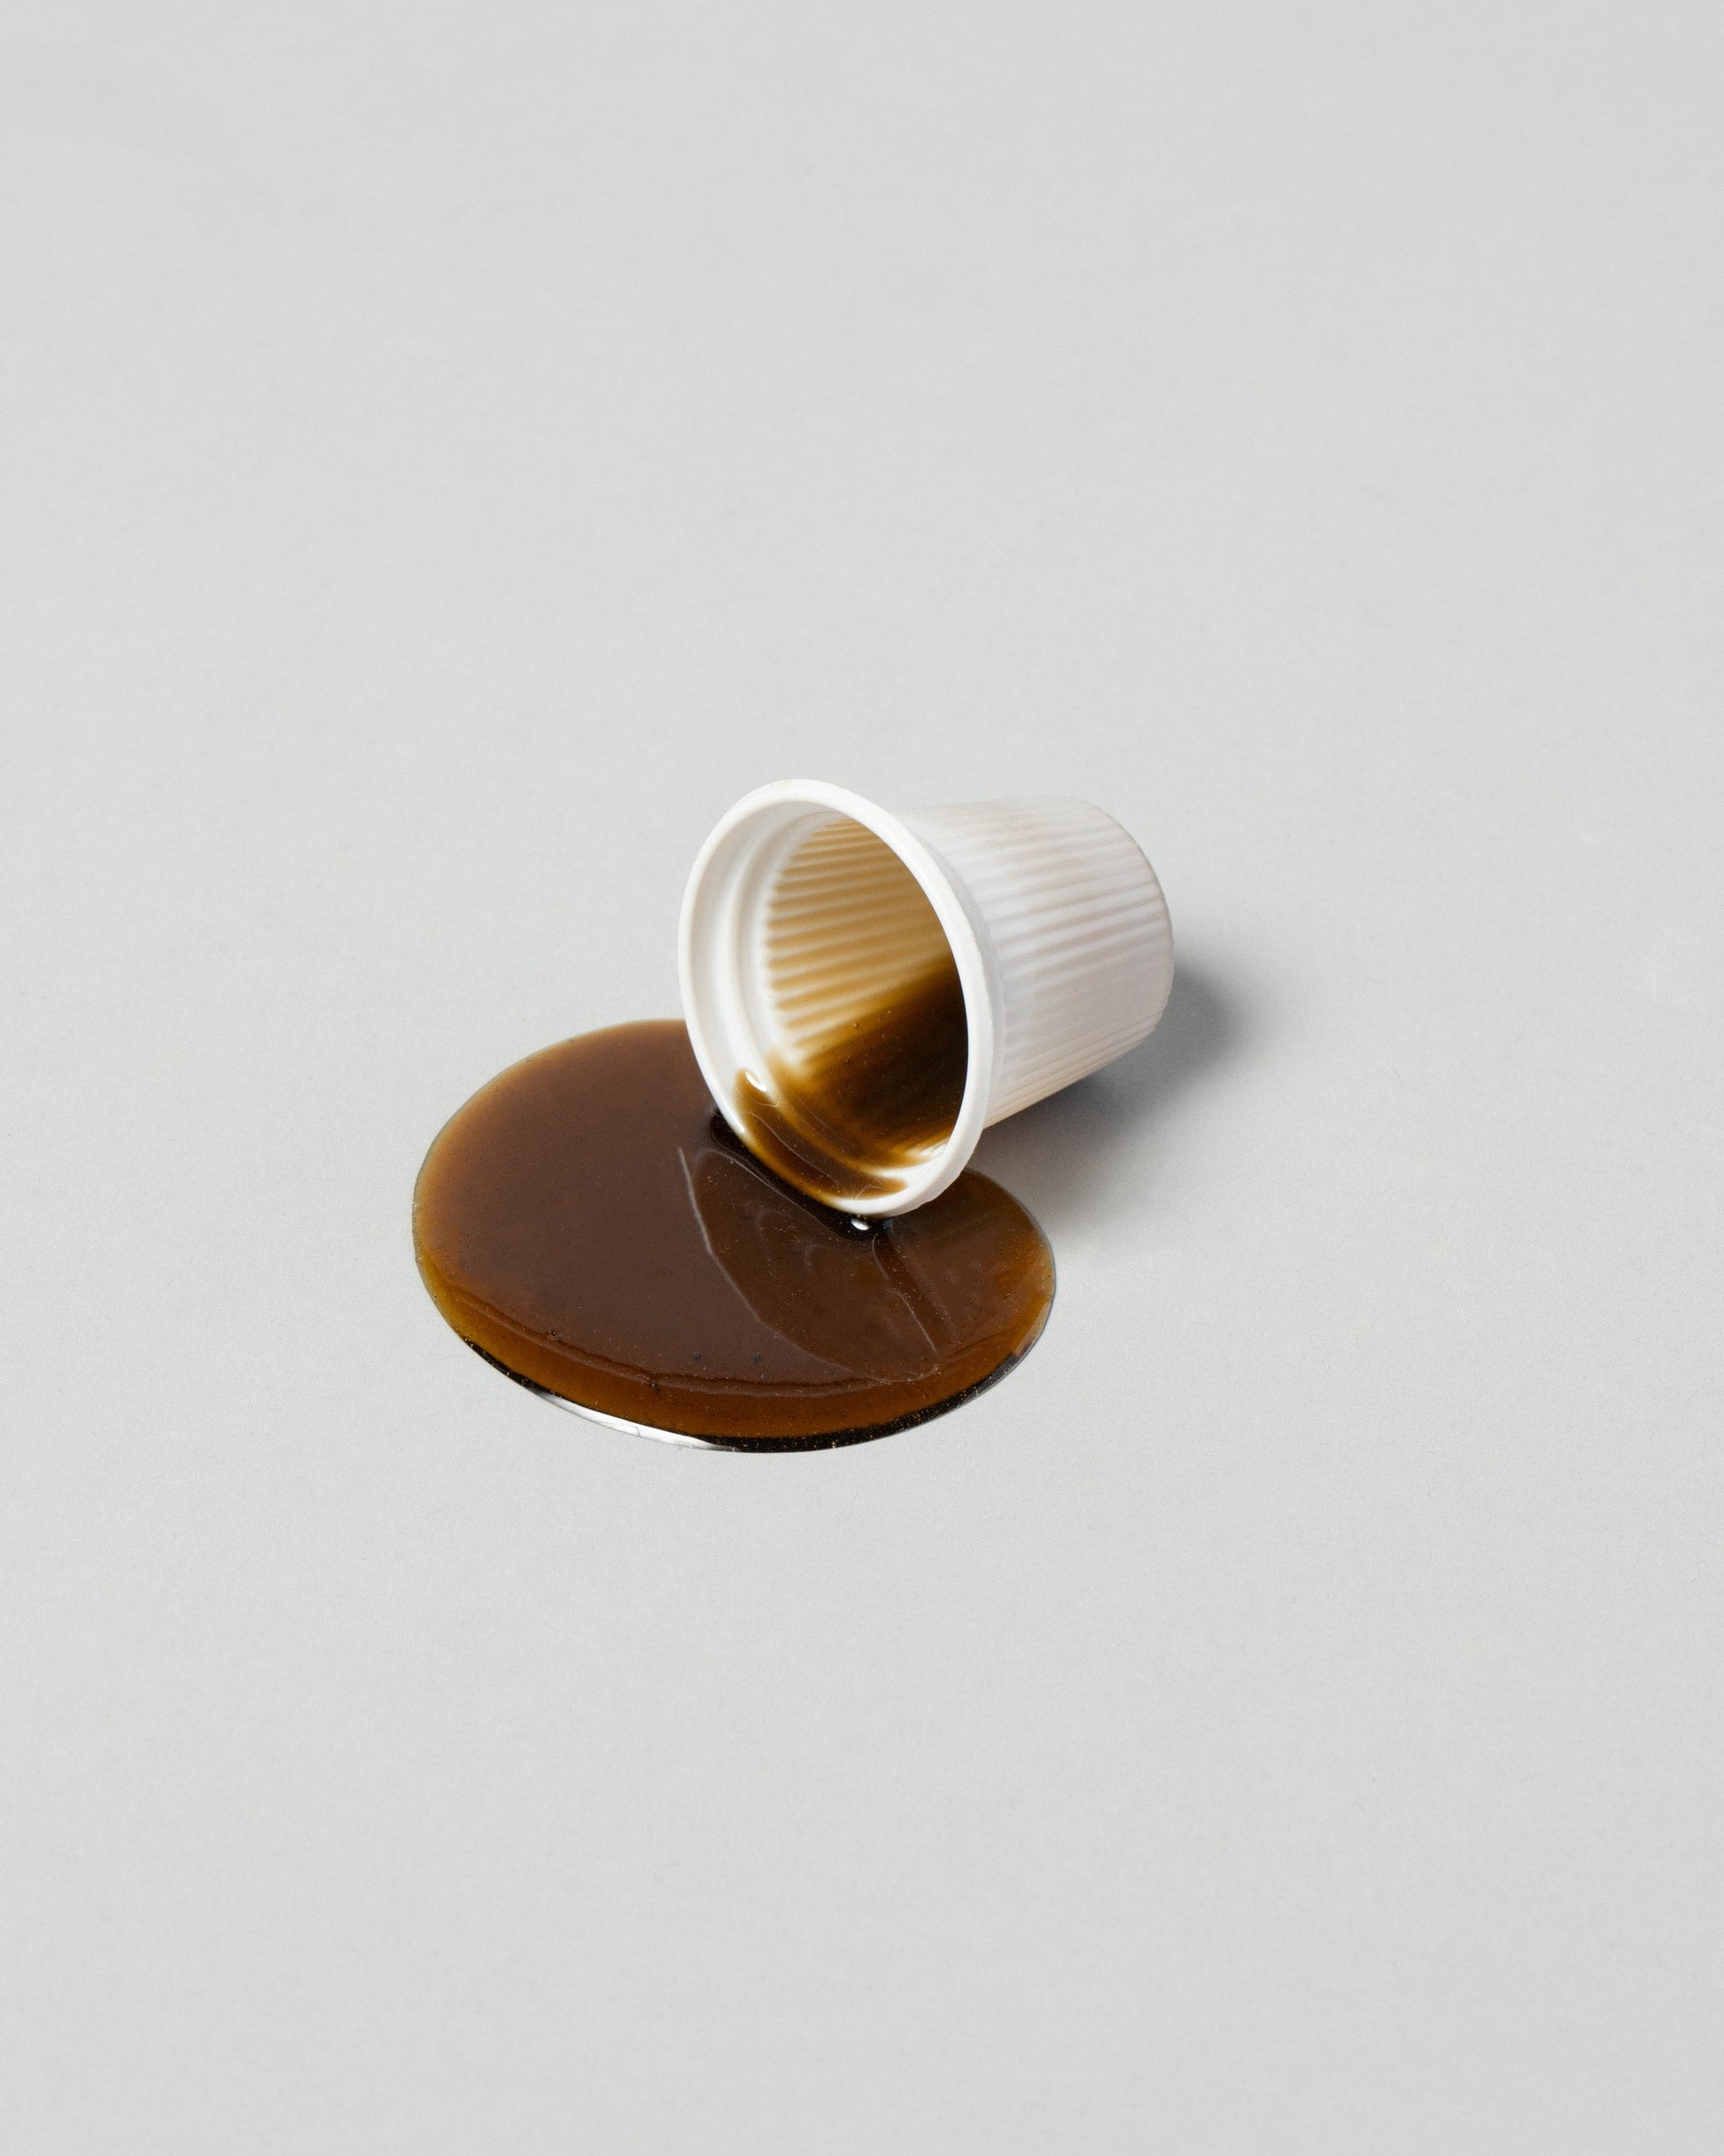 Closeup detail of the Spills Coffee Shot Breakfast on light color background.